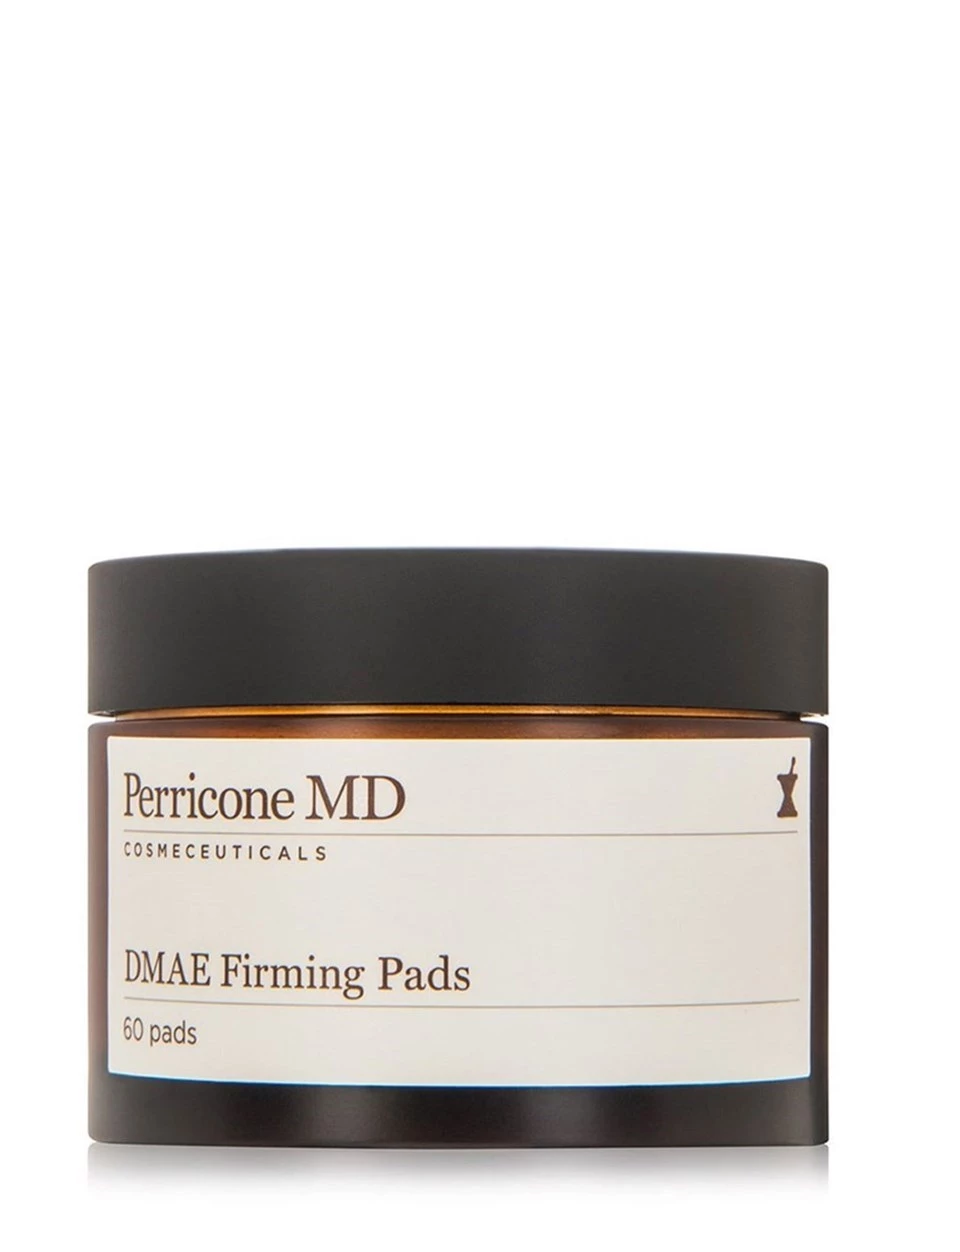 Perricone Md DMAE Firming 60 Pads